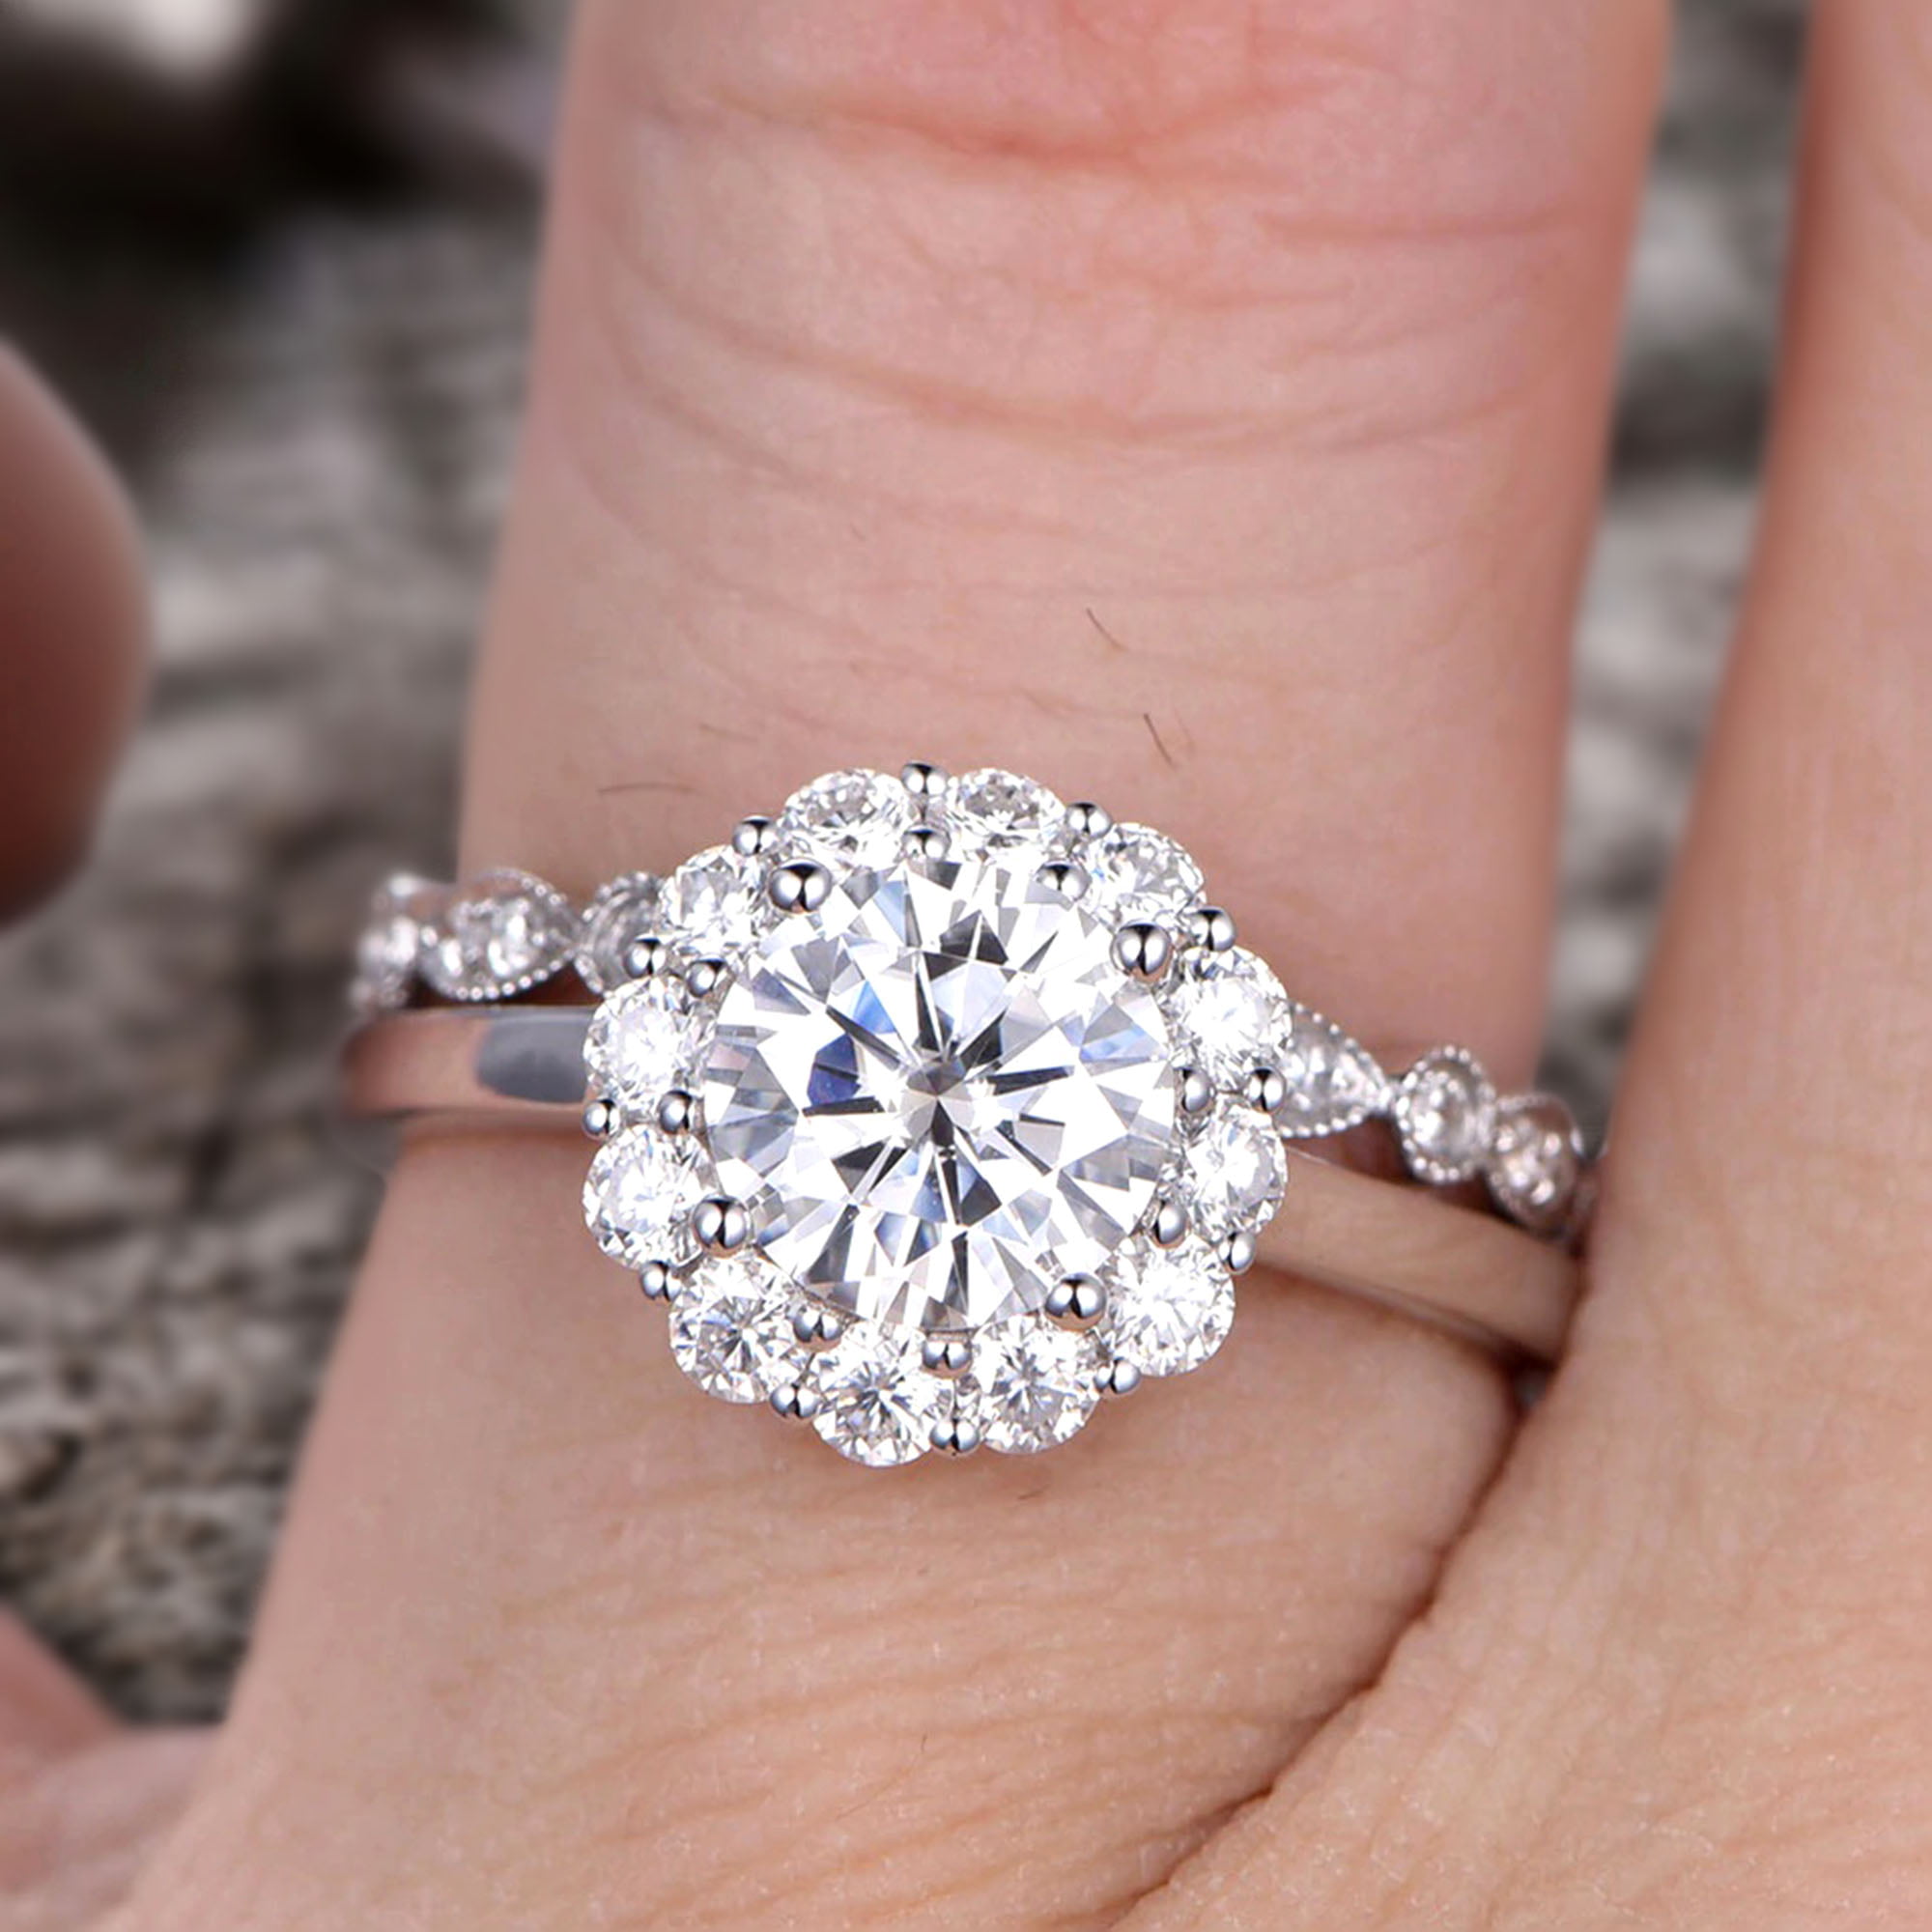 Trio wedding sets: His & Hers engagement rings